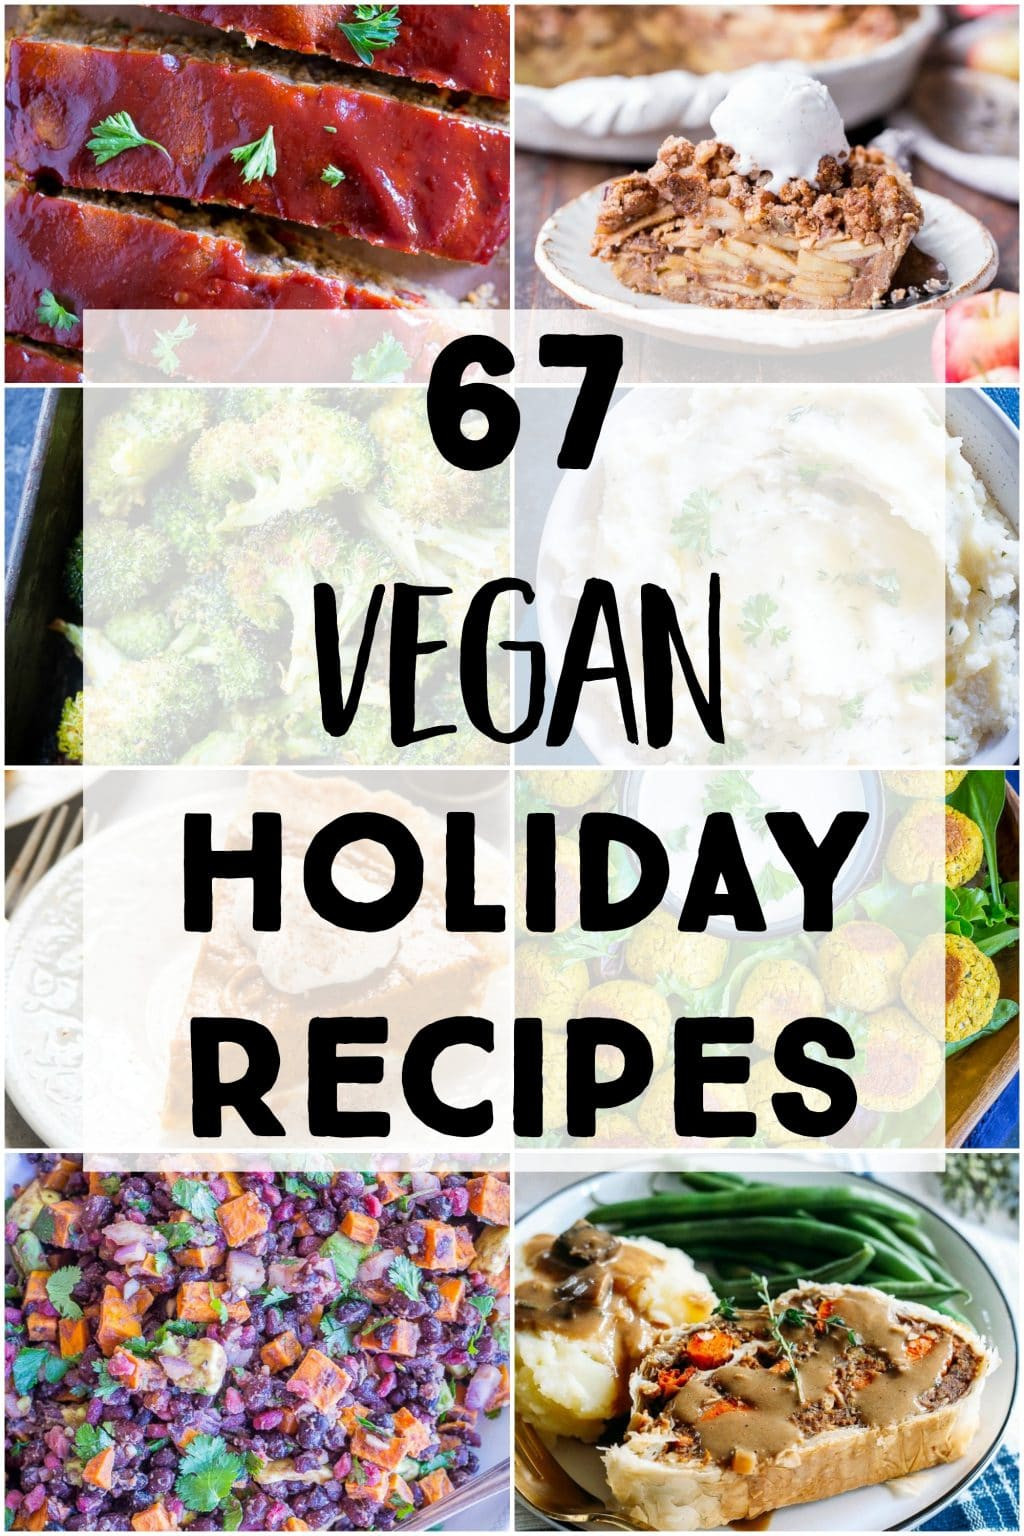 Vegan Christmas Side Dishes
 67 Vegan Holiday Recipes Appetizers Side Dishes Salads